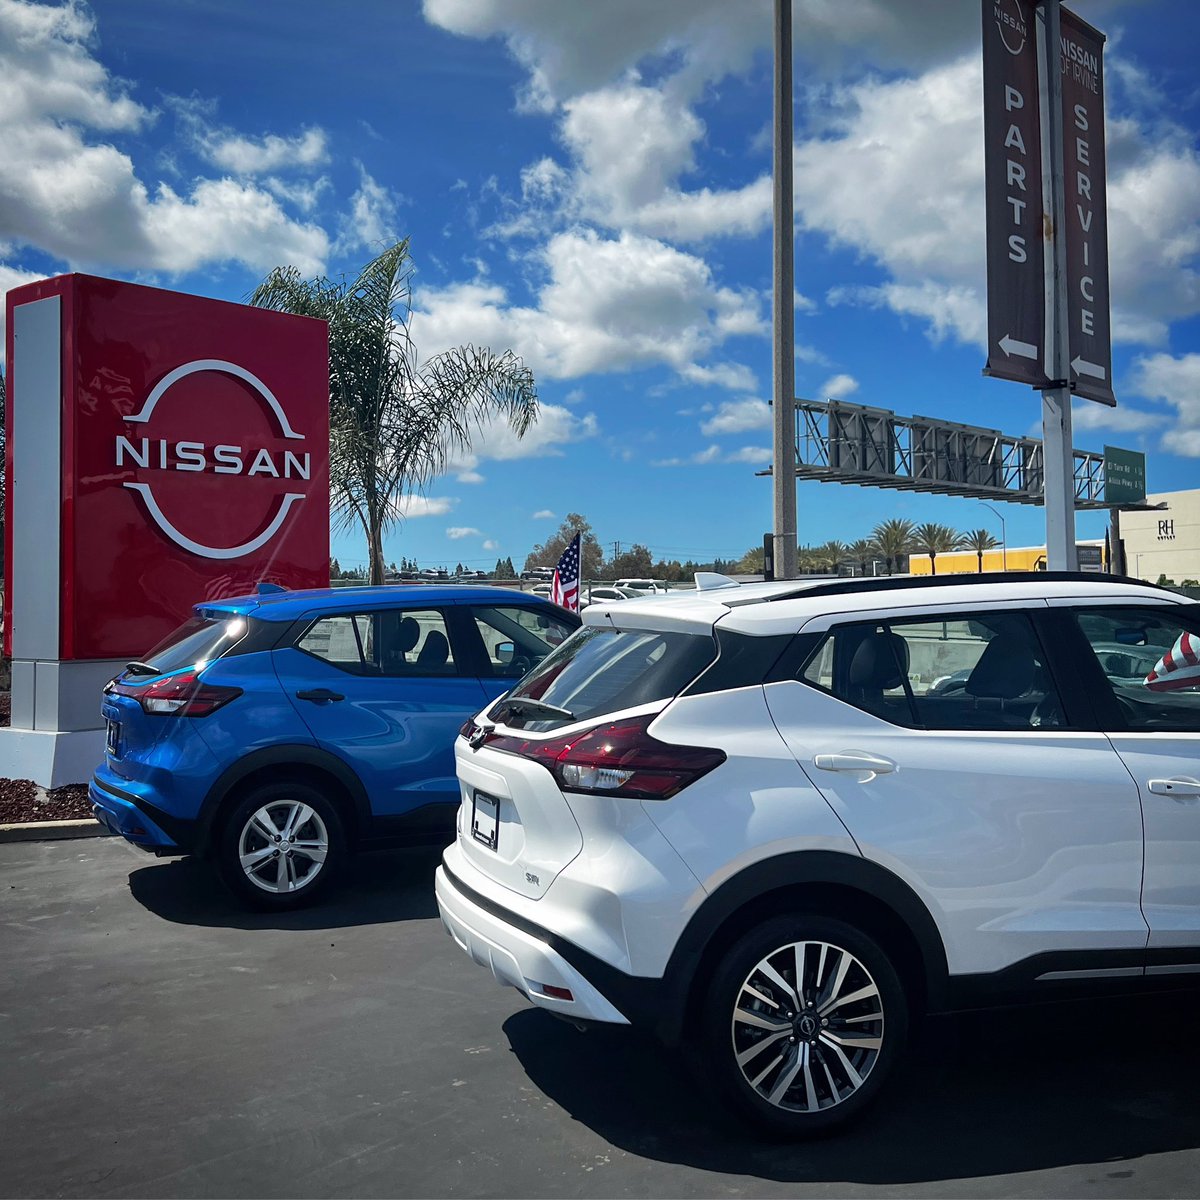 It's time to hit the road and embrace the season in style! 🚗💨 #NissanOfIrvine #SpringDrive #DrivingExcellence #CarEnthusiast #LuxuryRides #ExperienceExcellence